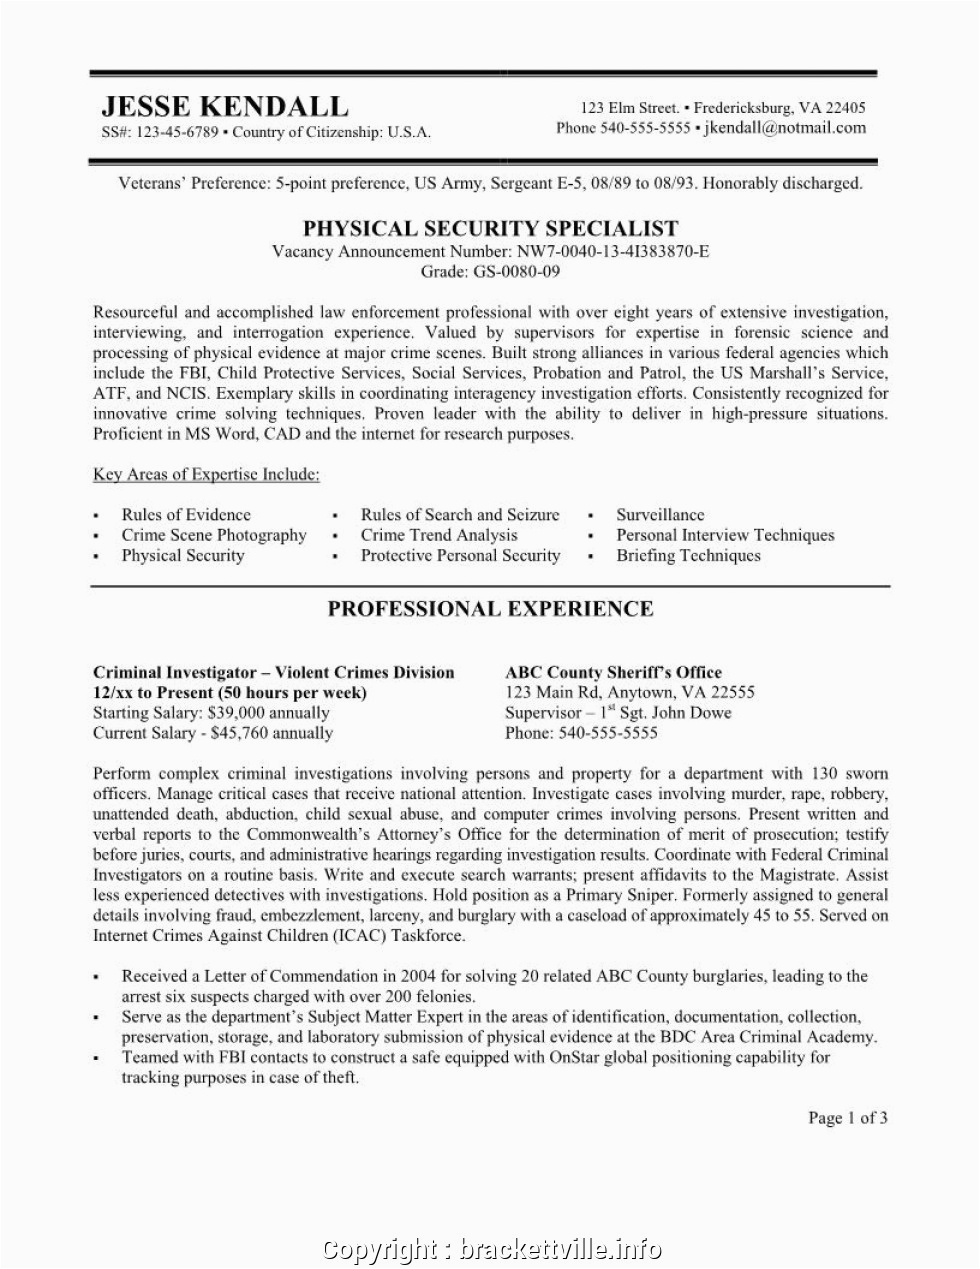 Resume Sample for Administrative assistant with No Experience top Administrative Ficer Resume format Sample Medical